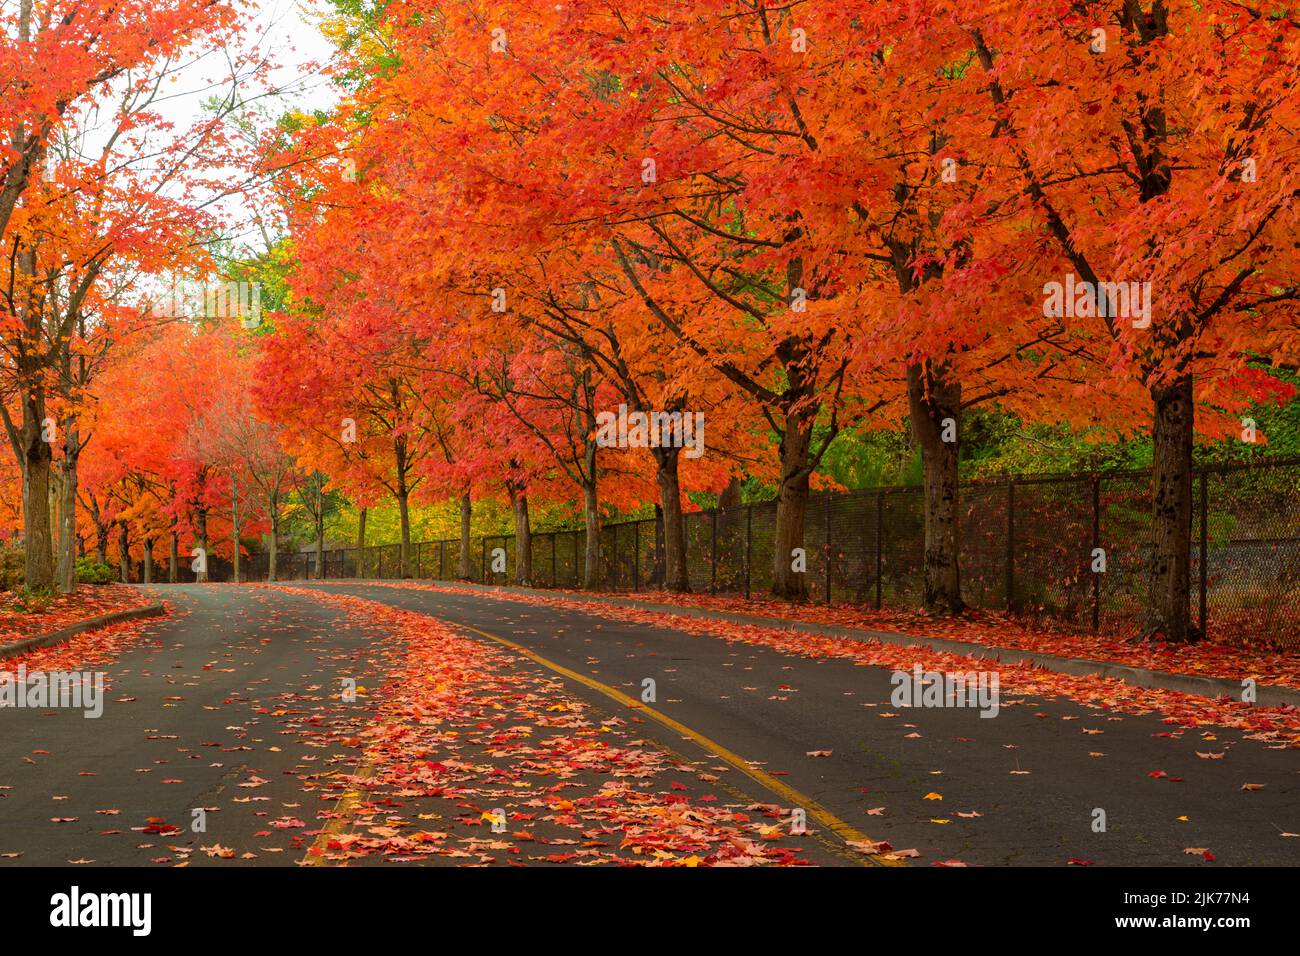 WA21790-00...WASHINGTON - Colorful canopy created by trees in fall color along the main road into Gene Coulon Memorial Beach Park in Renton. Stock Photo